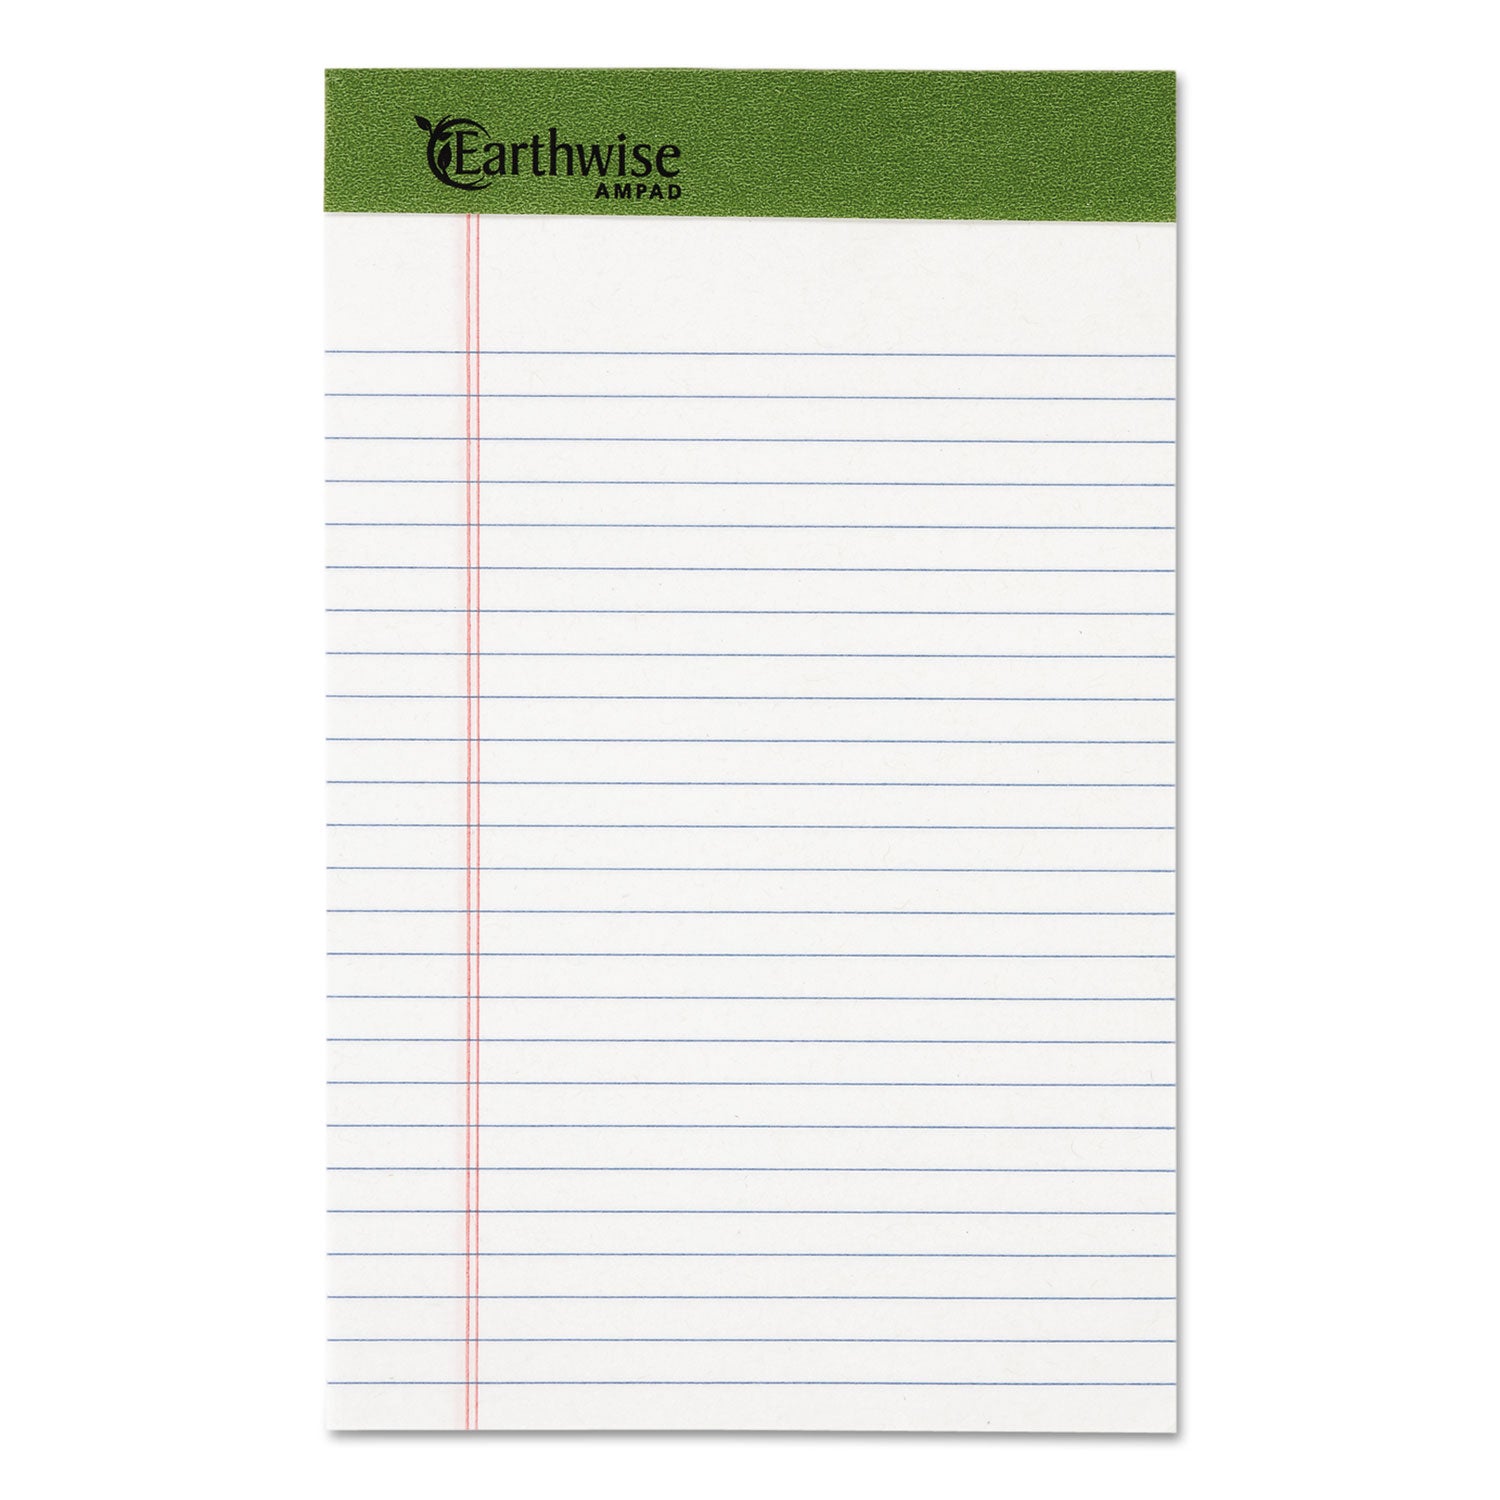 Earthwise by Ampad Recycled Writing Pad, Narrow Rule, Politex Green Headband, 50 White 5 x 8 Sheets, Dozen - 